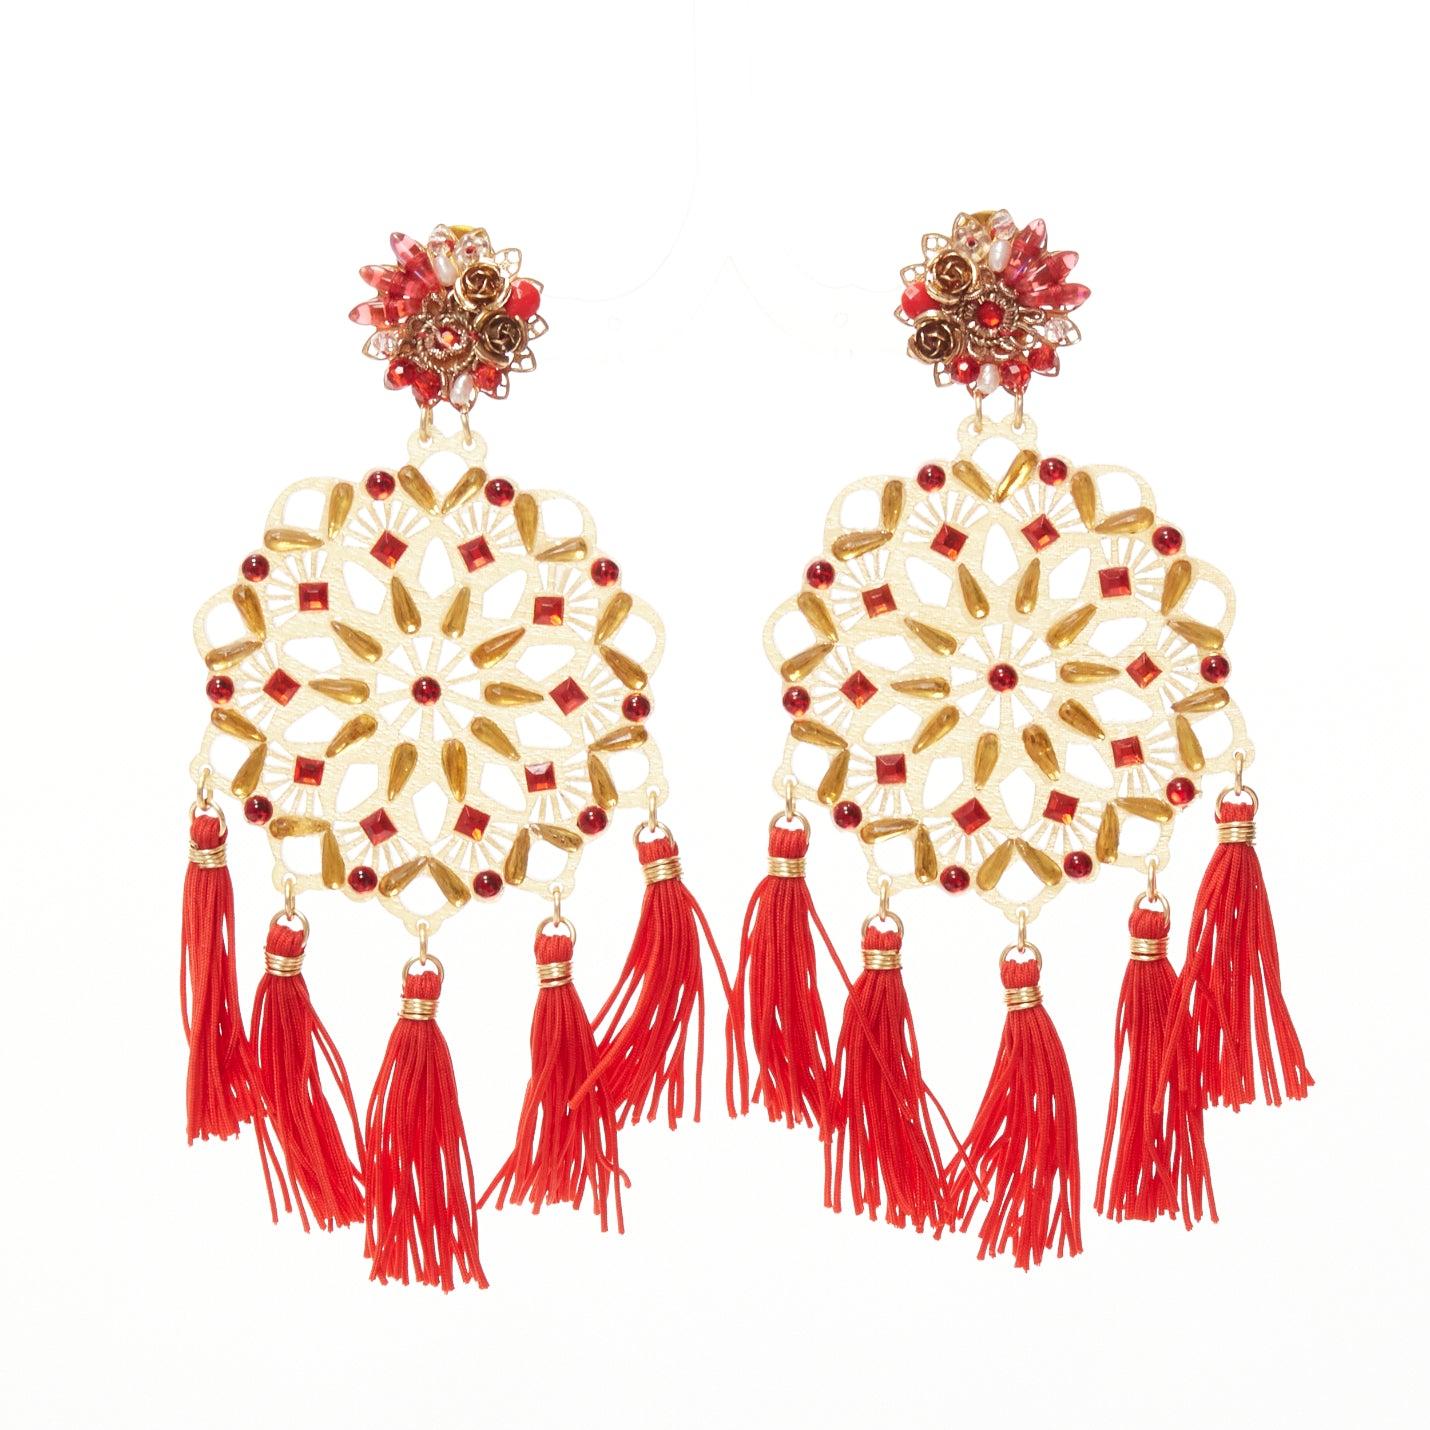 MERCEDES SALAZAR gold red acrylic beads tassel new year clip on earrings
Reference: AAWC/A01255
Brand: Mercedes Salazar
Material: Acrylic, Fabric
Color: Gold, Red
Pattern: Solid
Closure: Clip On
Lining: Gold Metal

CONDITION:
Condition: Excellent,